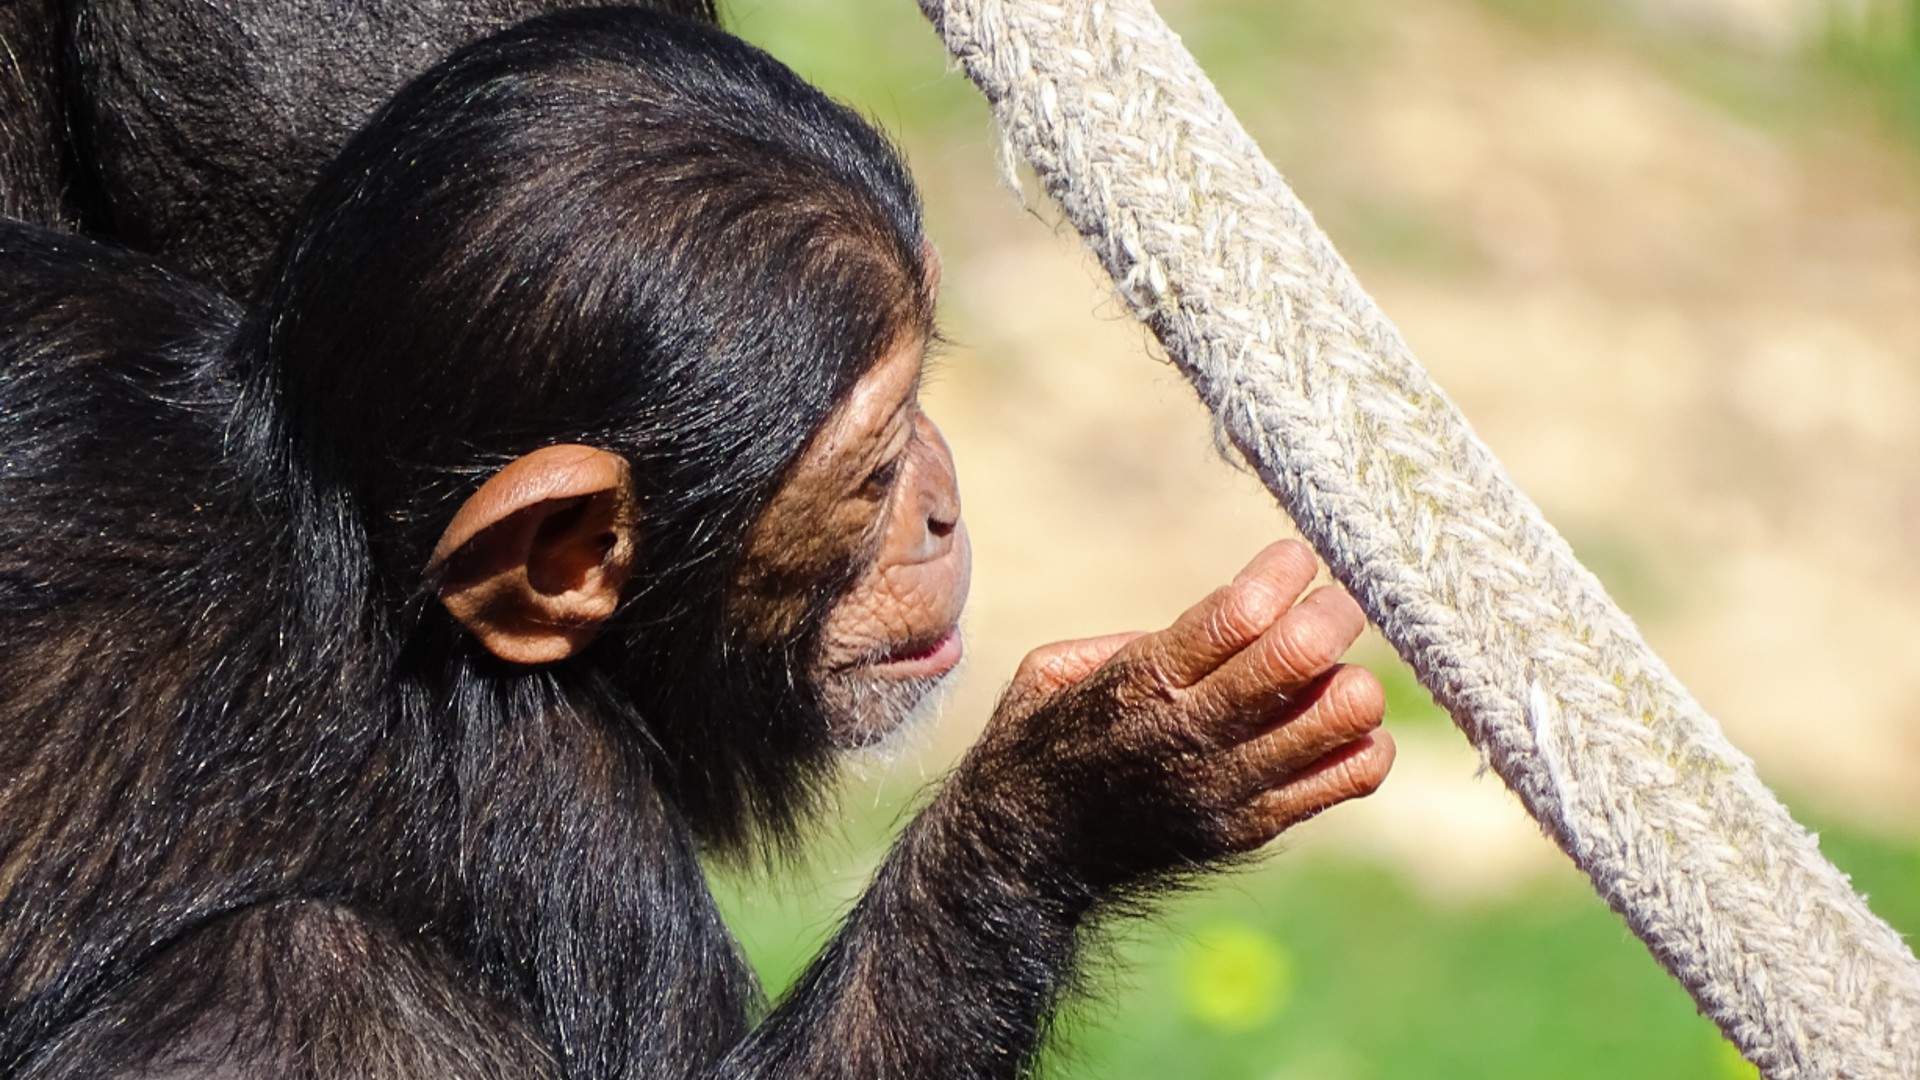 Wellington Zoo Has Just Welcomed a New Chimpanzee Baby